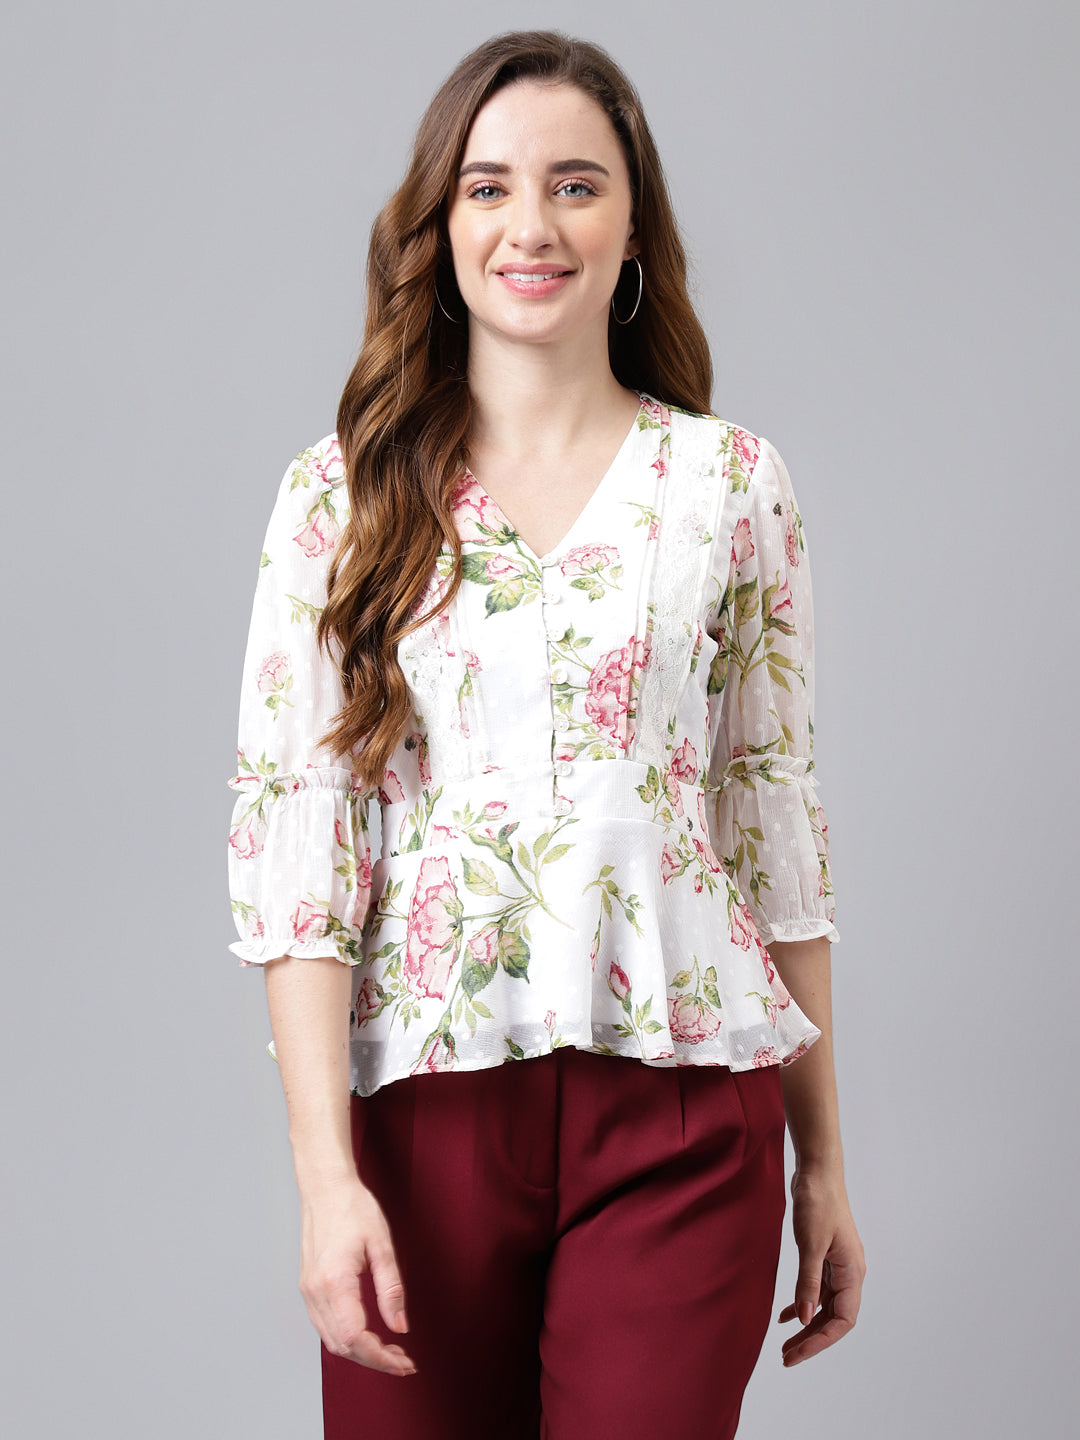 Ivory 3/4 Sleeve Printed Normal Blouse